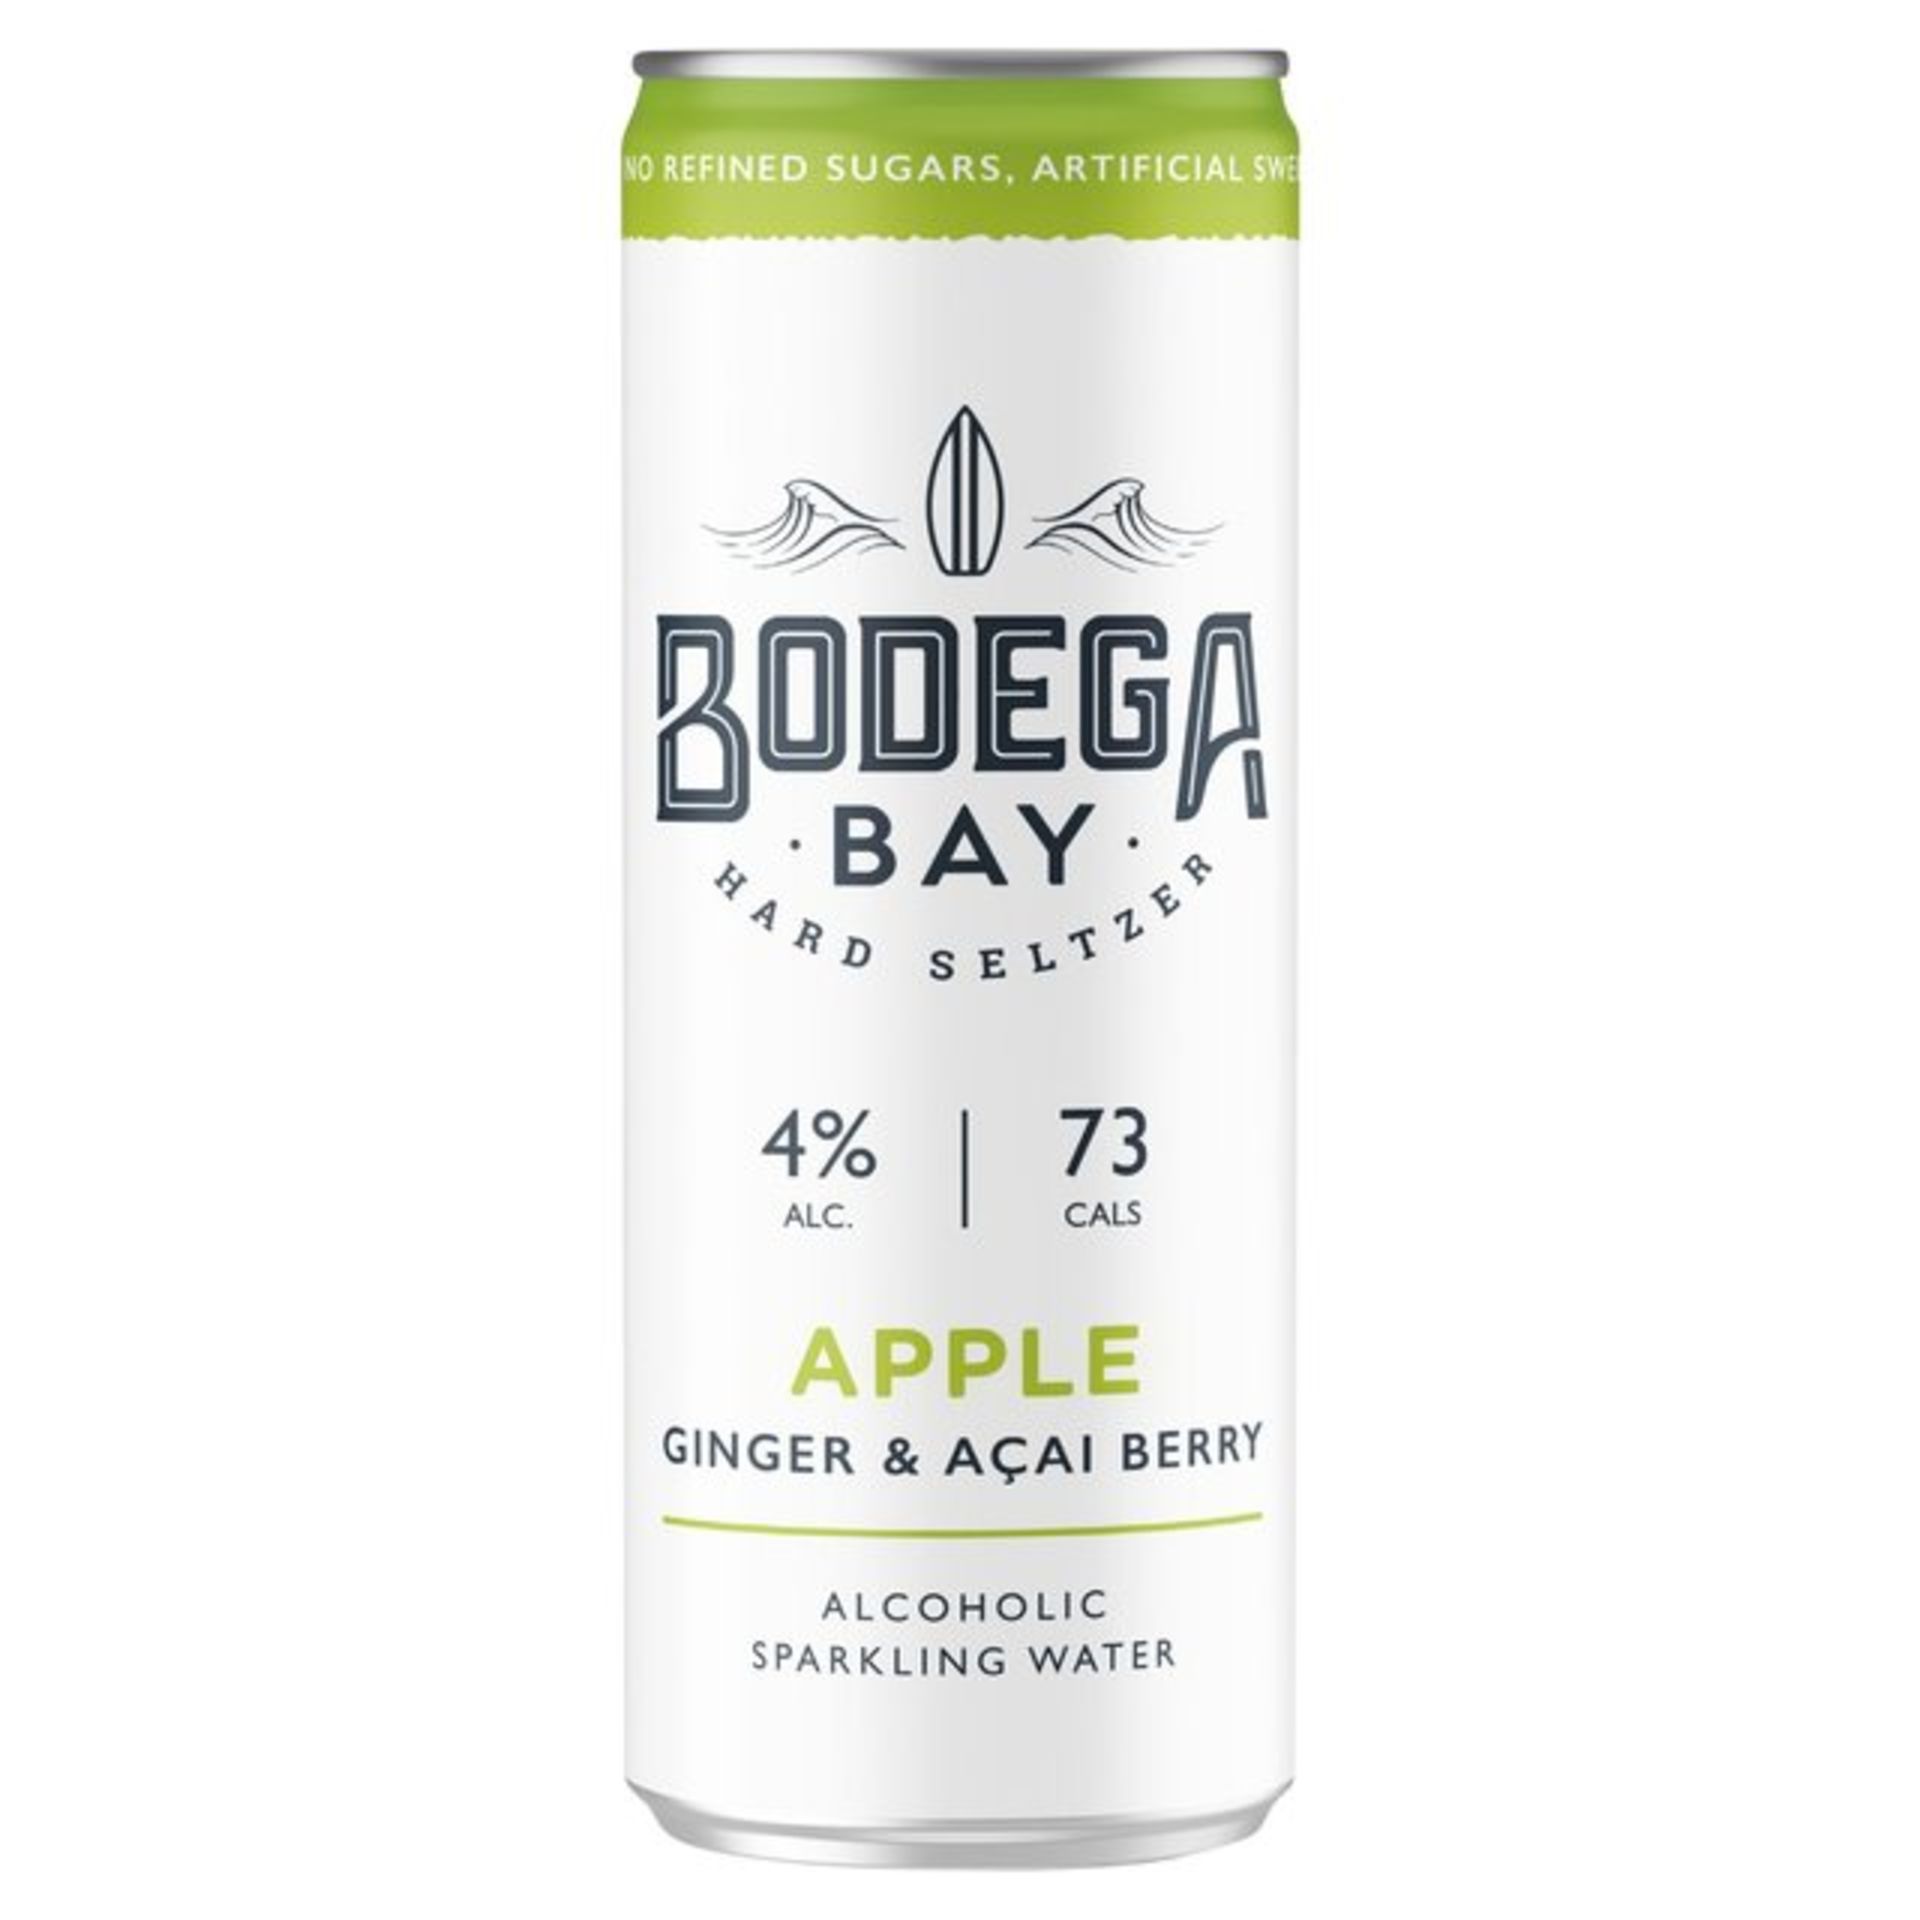 360 x Cans of Bodega Bay Hard Seltzer 250ml Alcoholic Sparkling Water Drinks - Various Flavours - Image 6 of 15